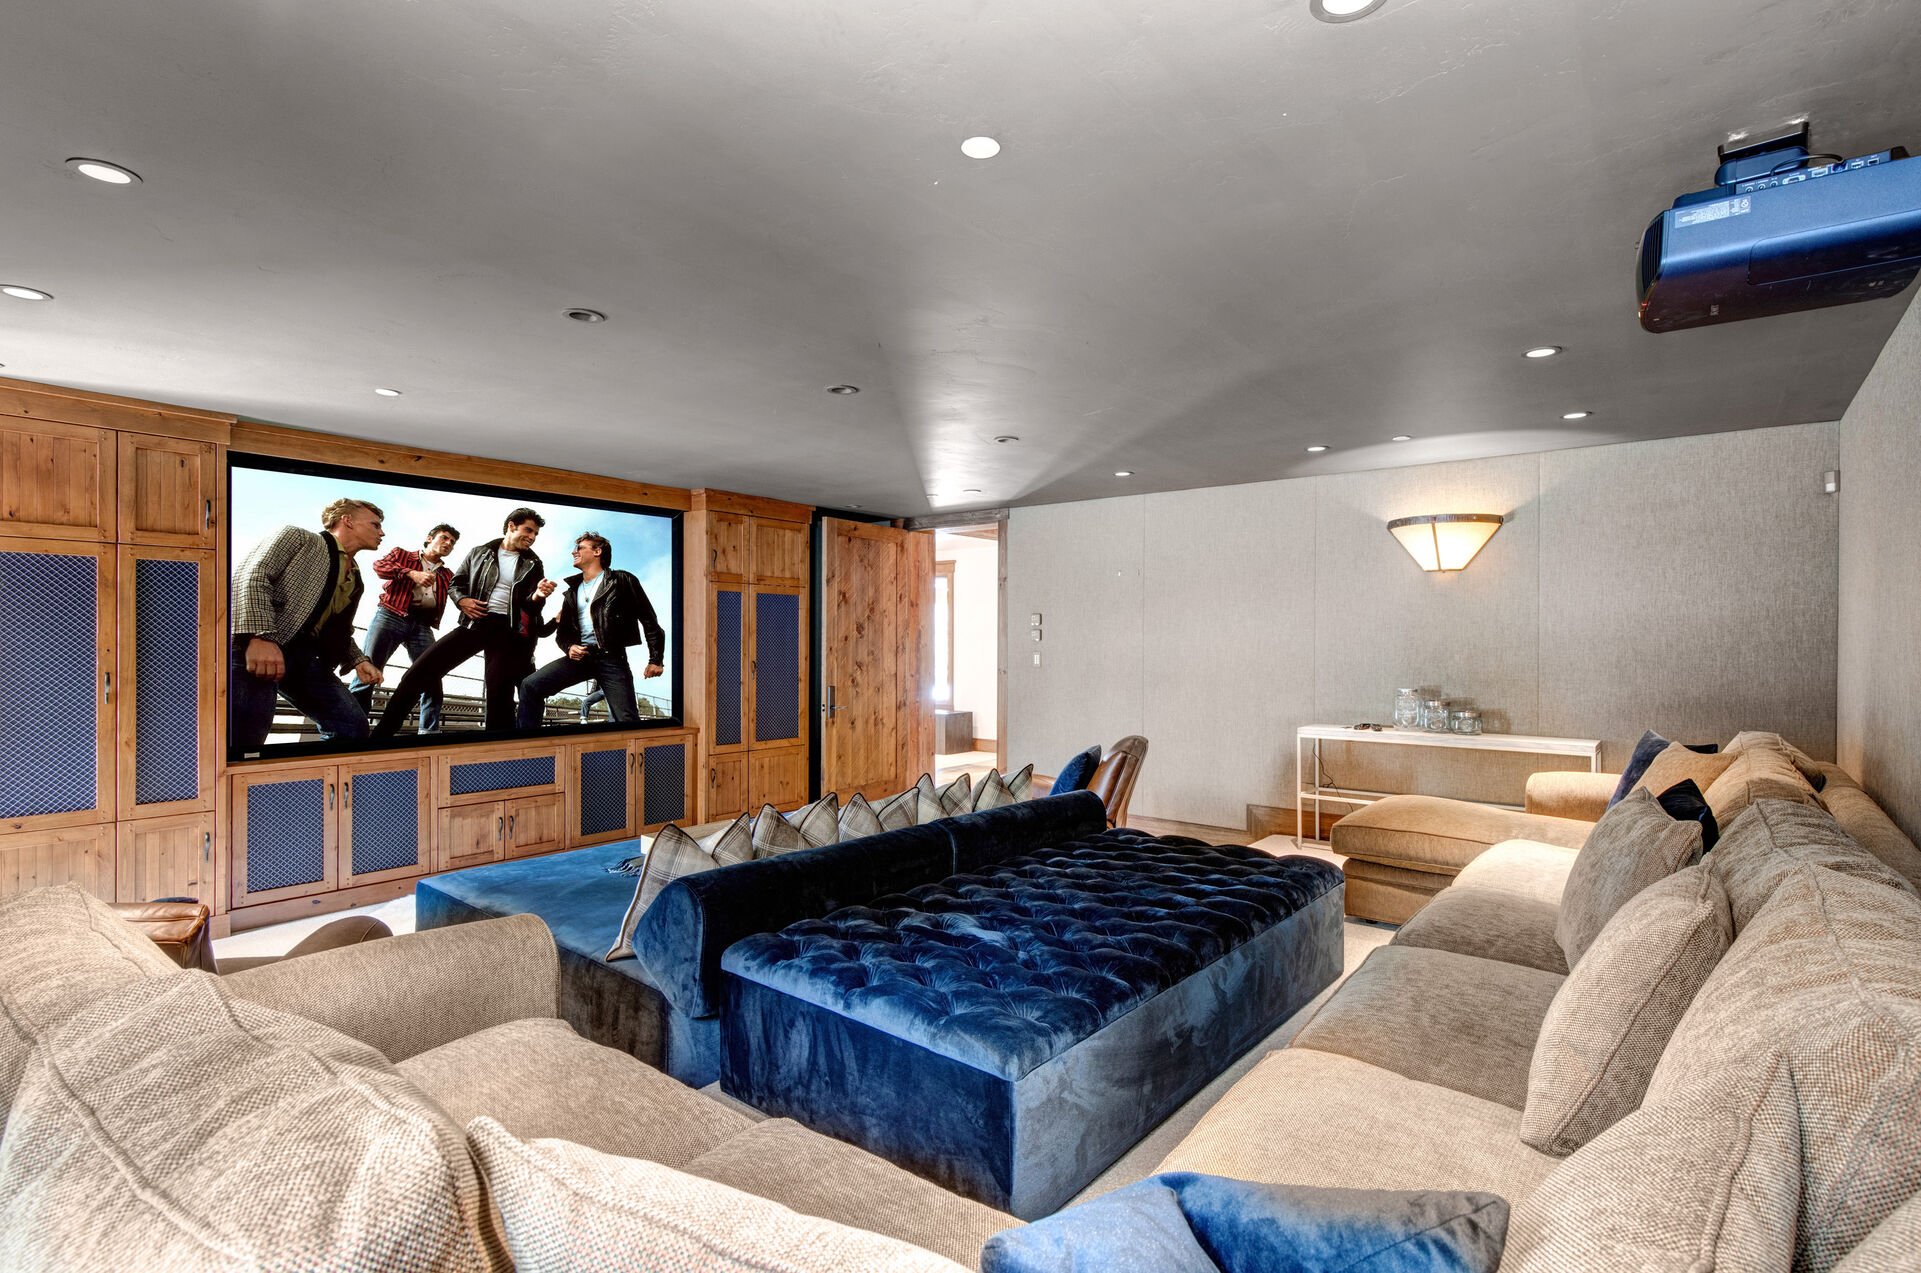 Ground level theater room with large projector, soundproof walls, oversized sectional and sound system